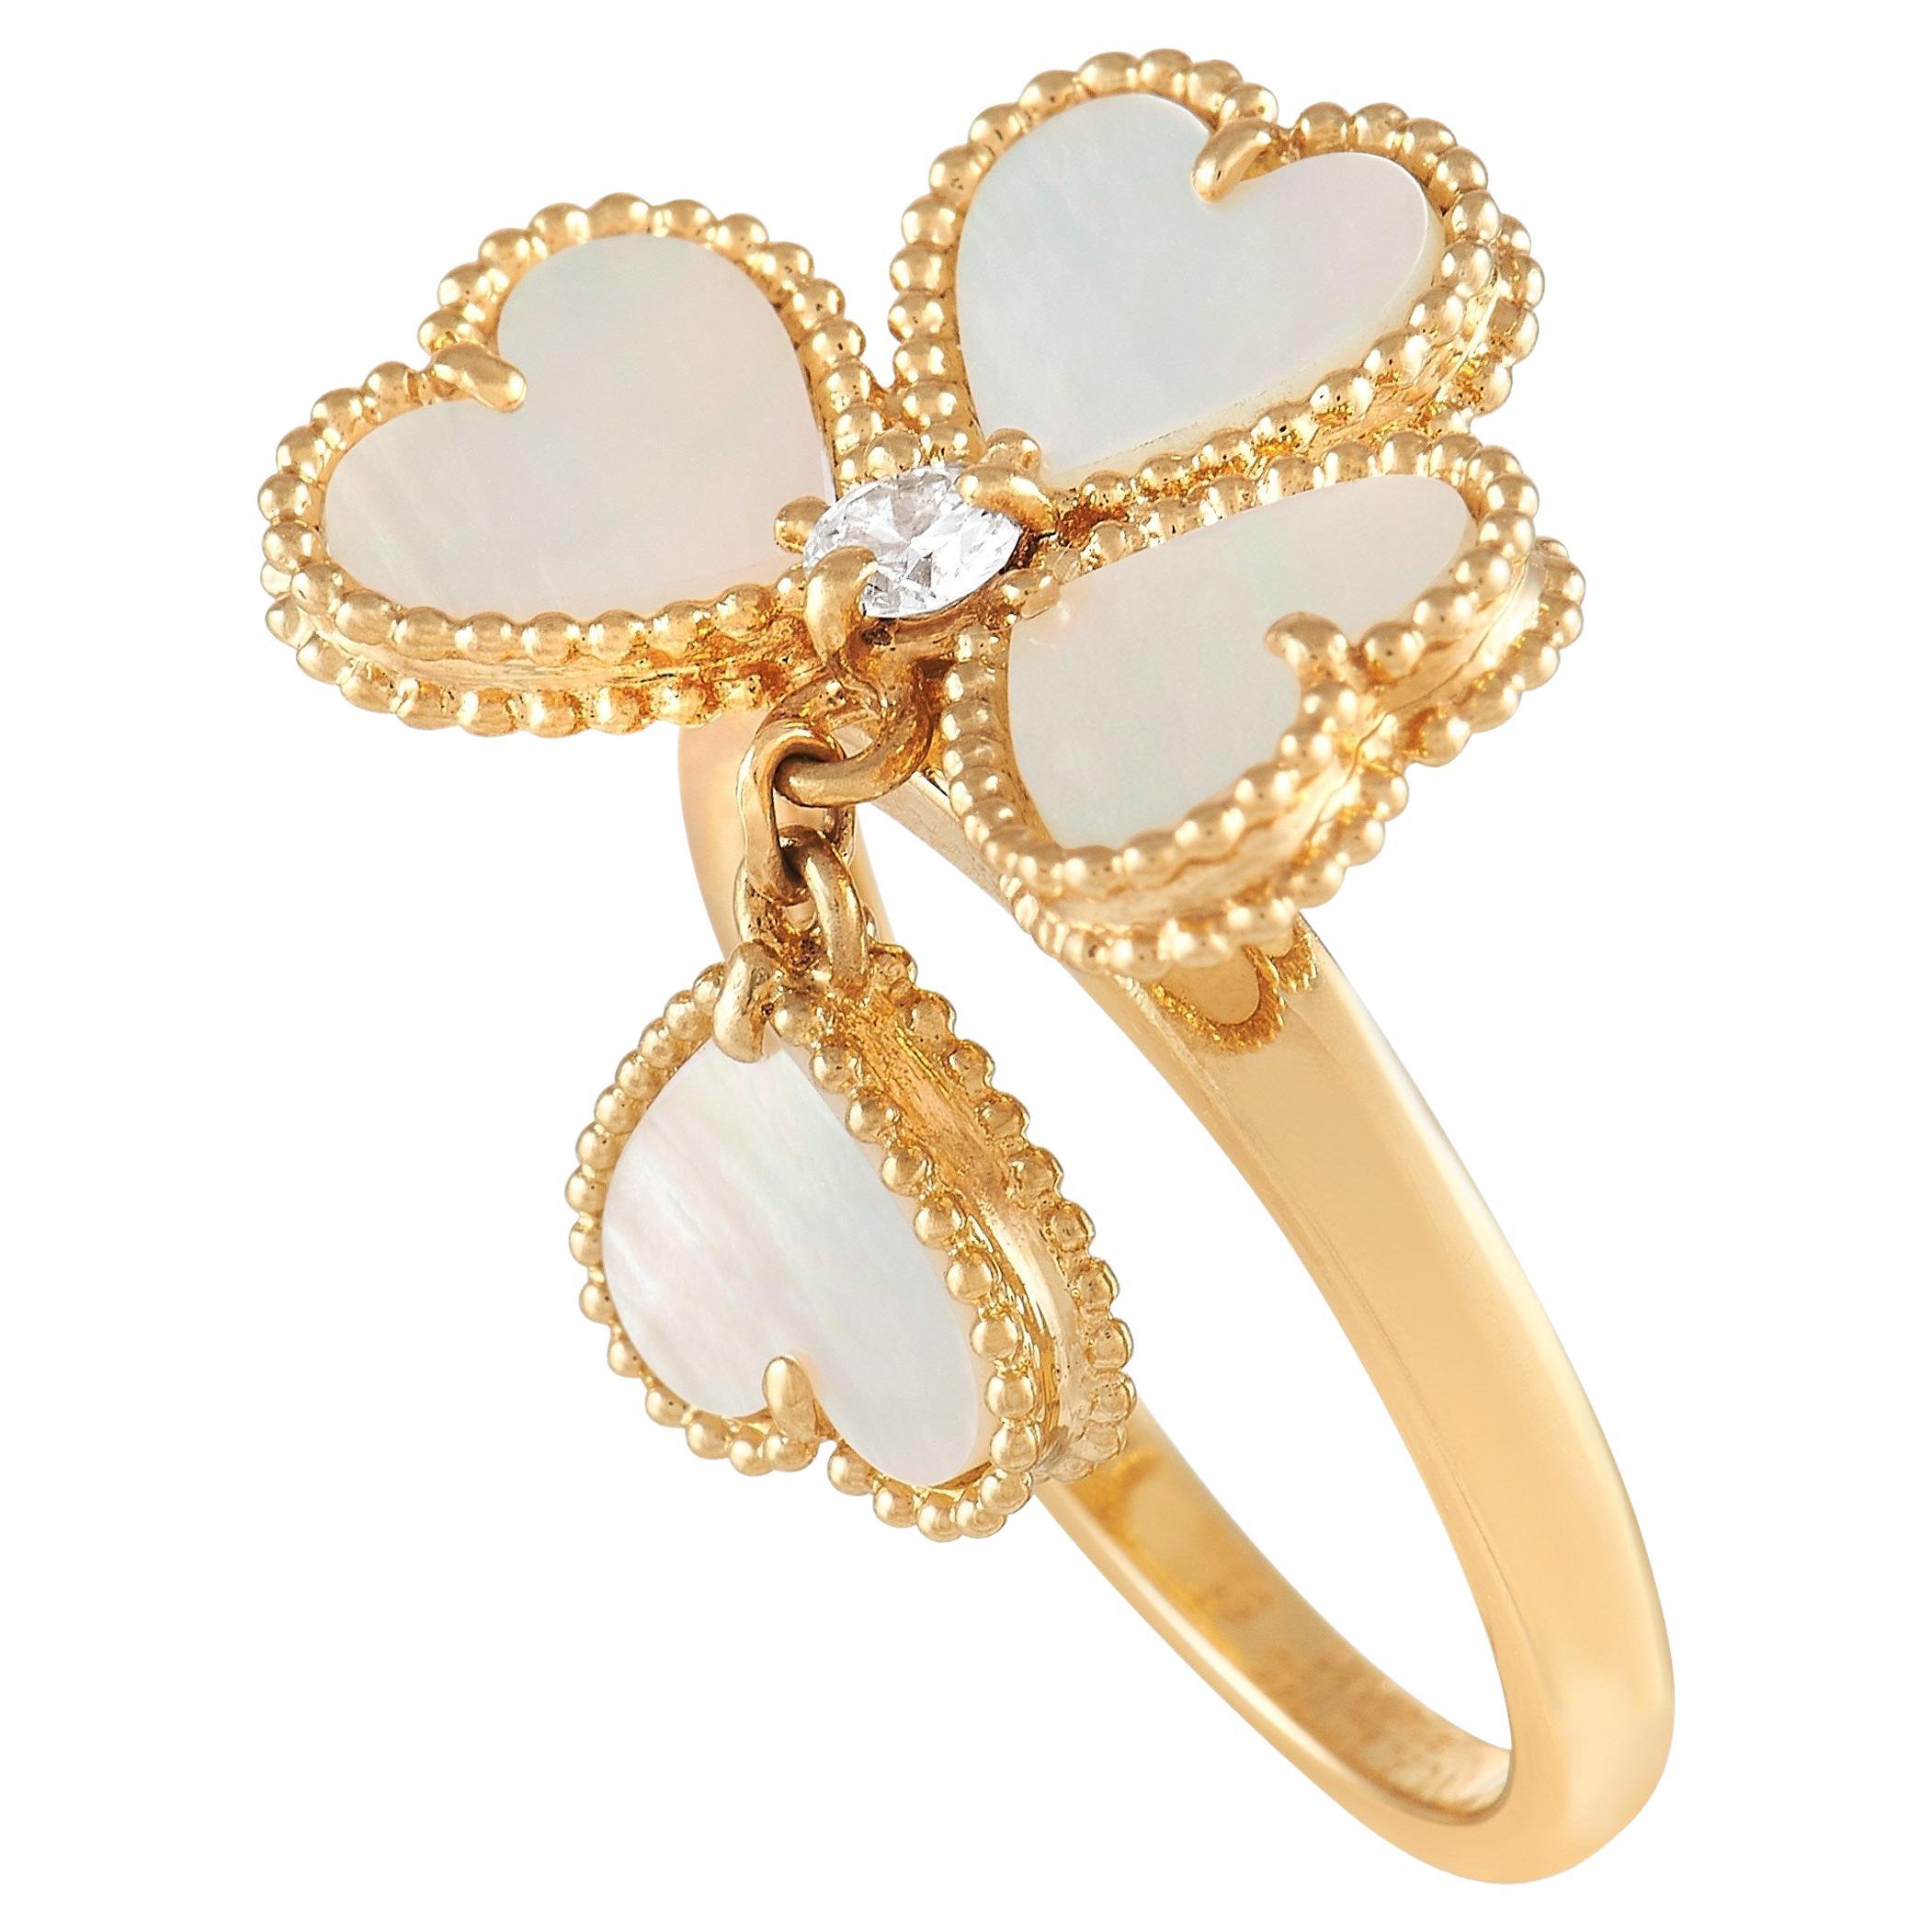 Van Cleef & Arpels Alhambra 18K Yellow Gold Diamond & Mother of Pearl Ring